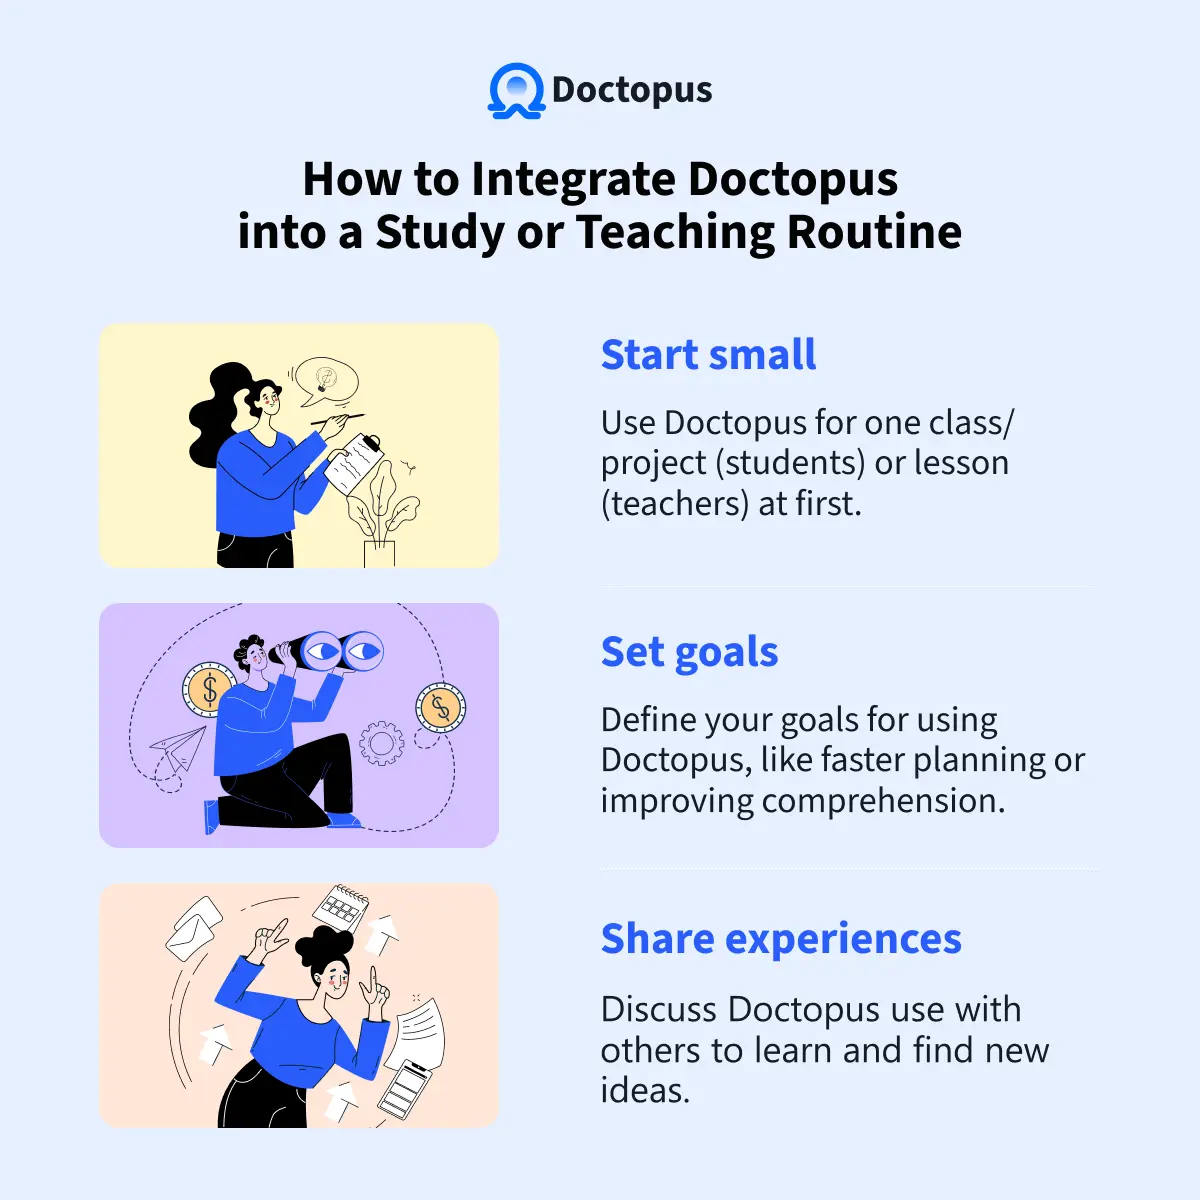 How to integrate Doctopus into a teaching or study routine